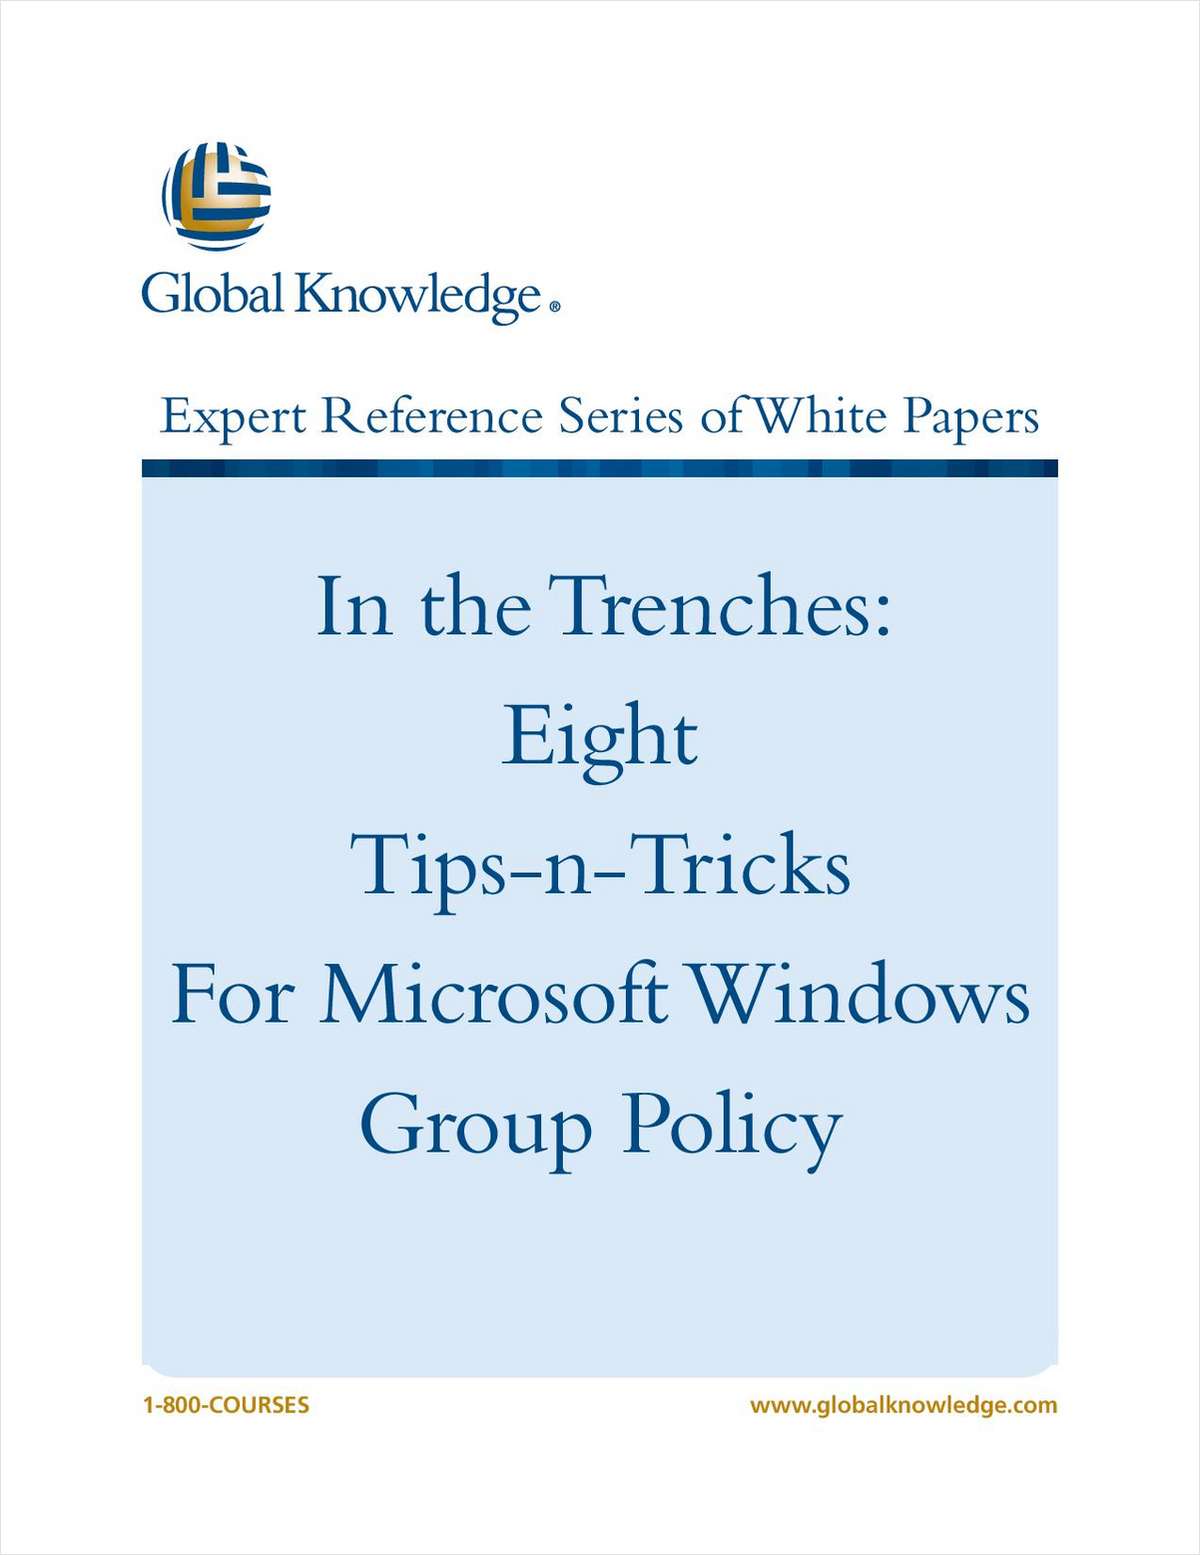 In the Trenches: Eight Tips-n-Tricks for Microsoft Windows Group Policy